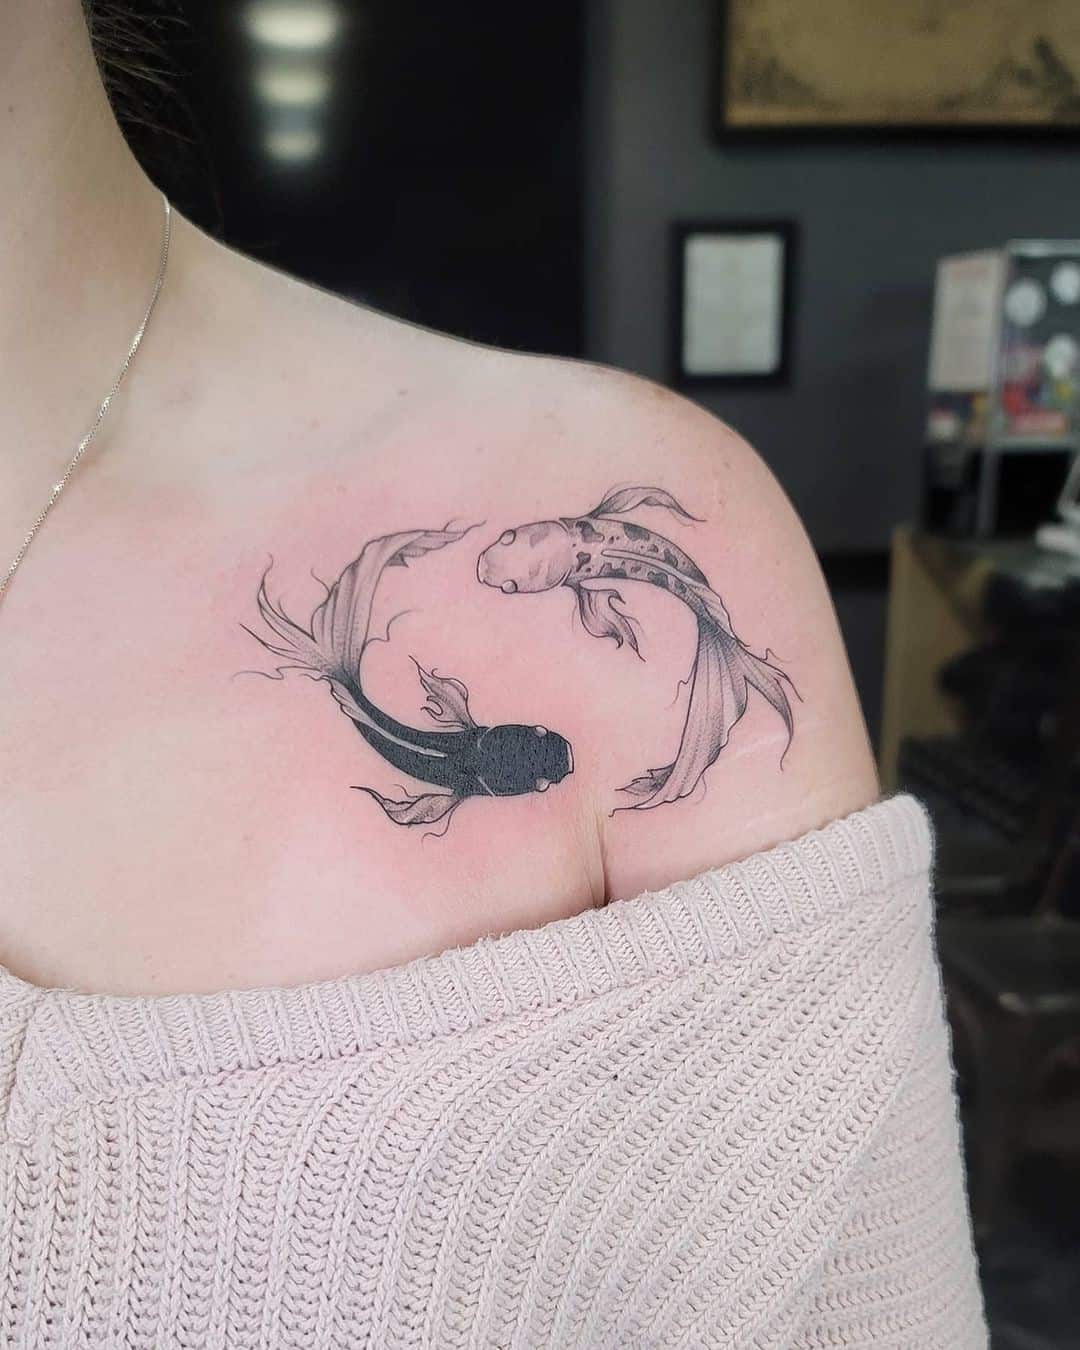 Top more than 75 fish back tattoos latest